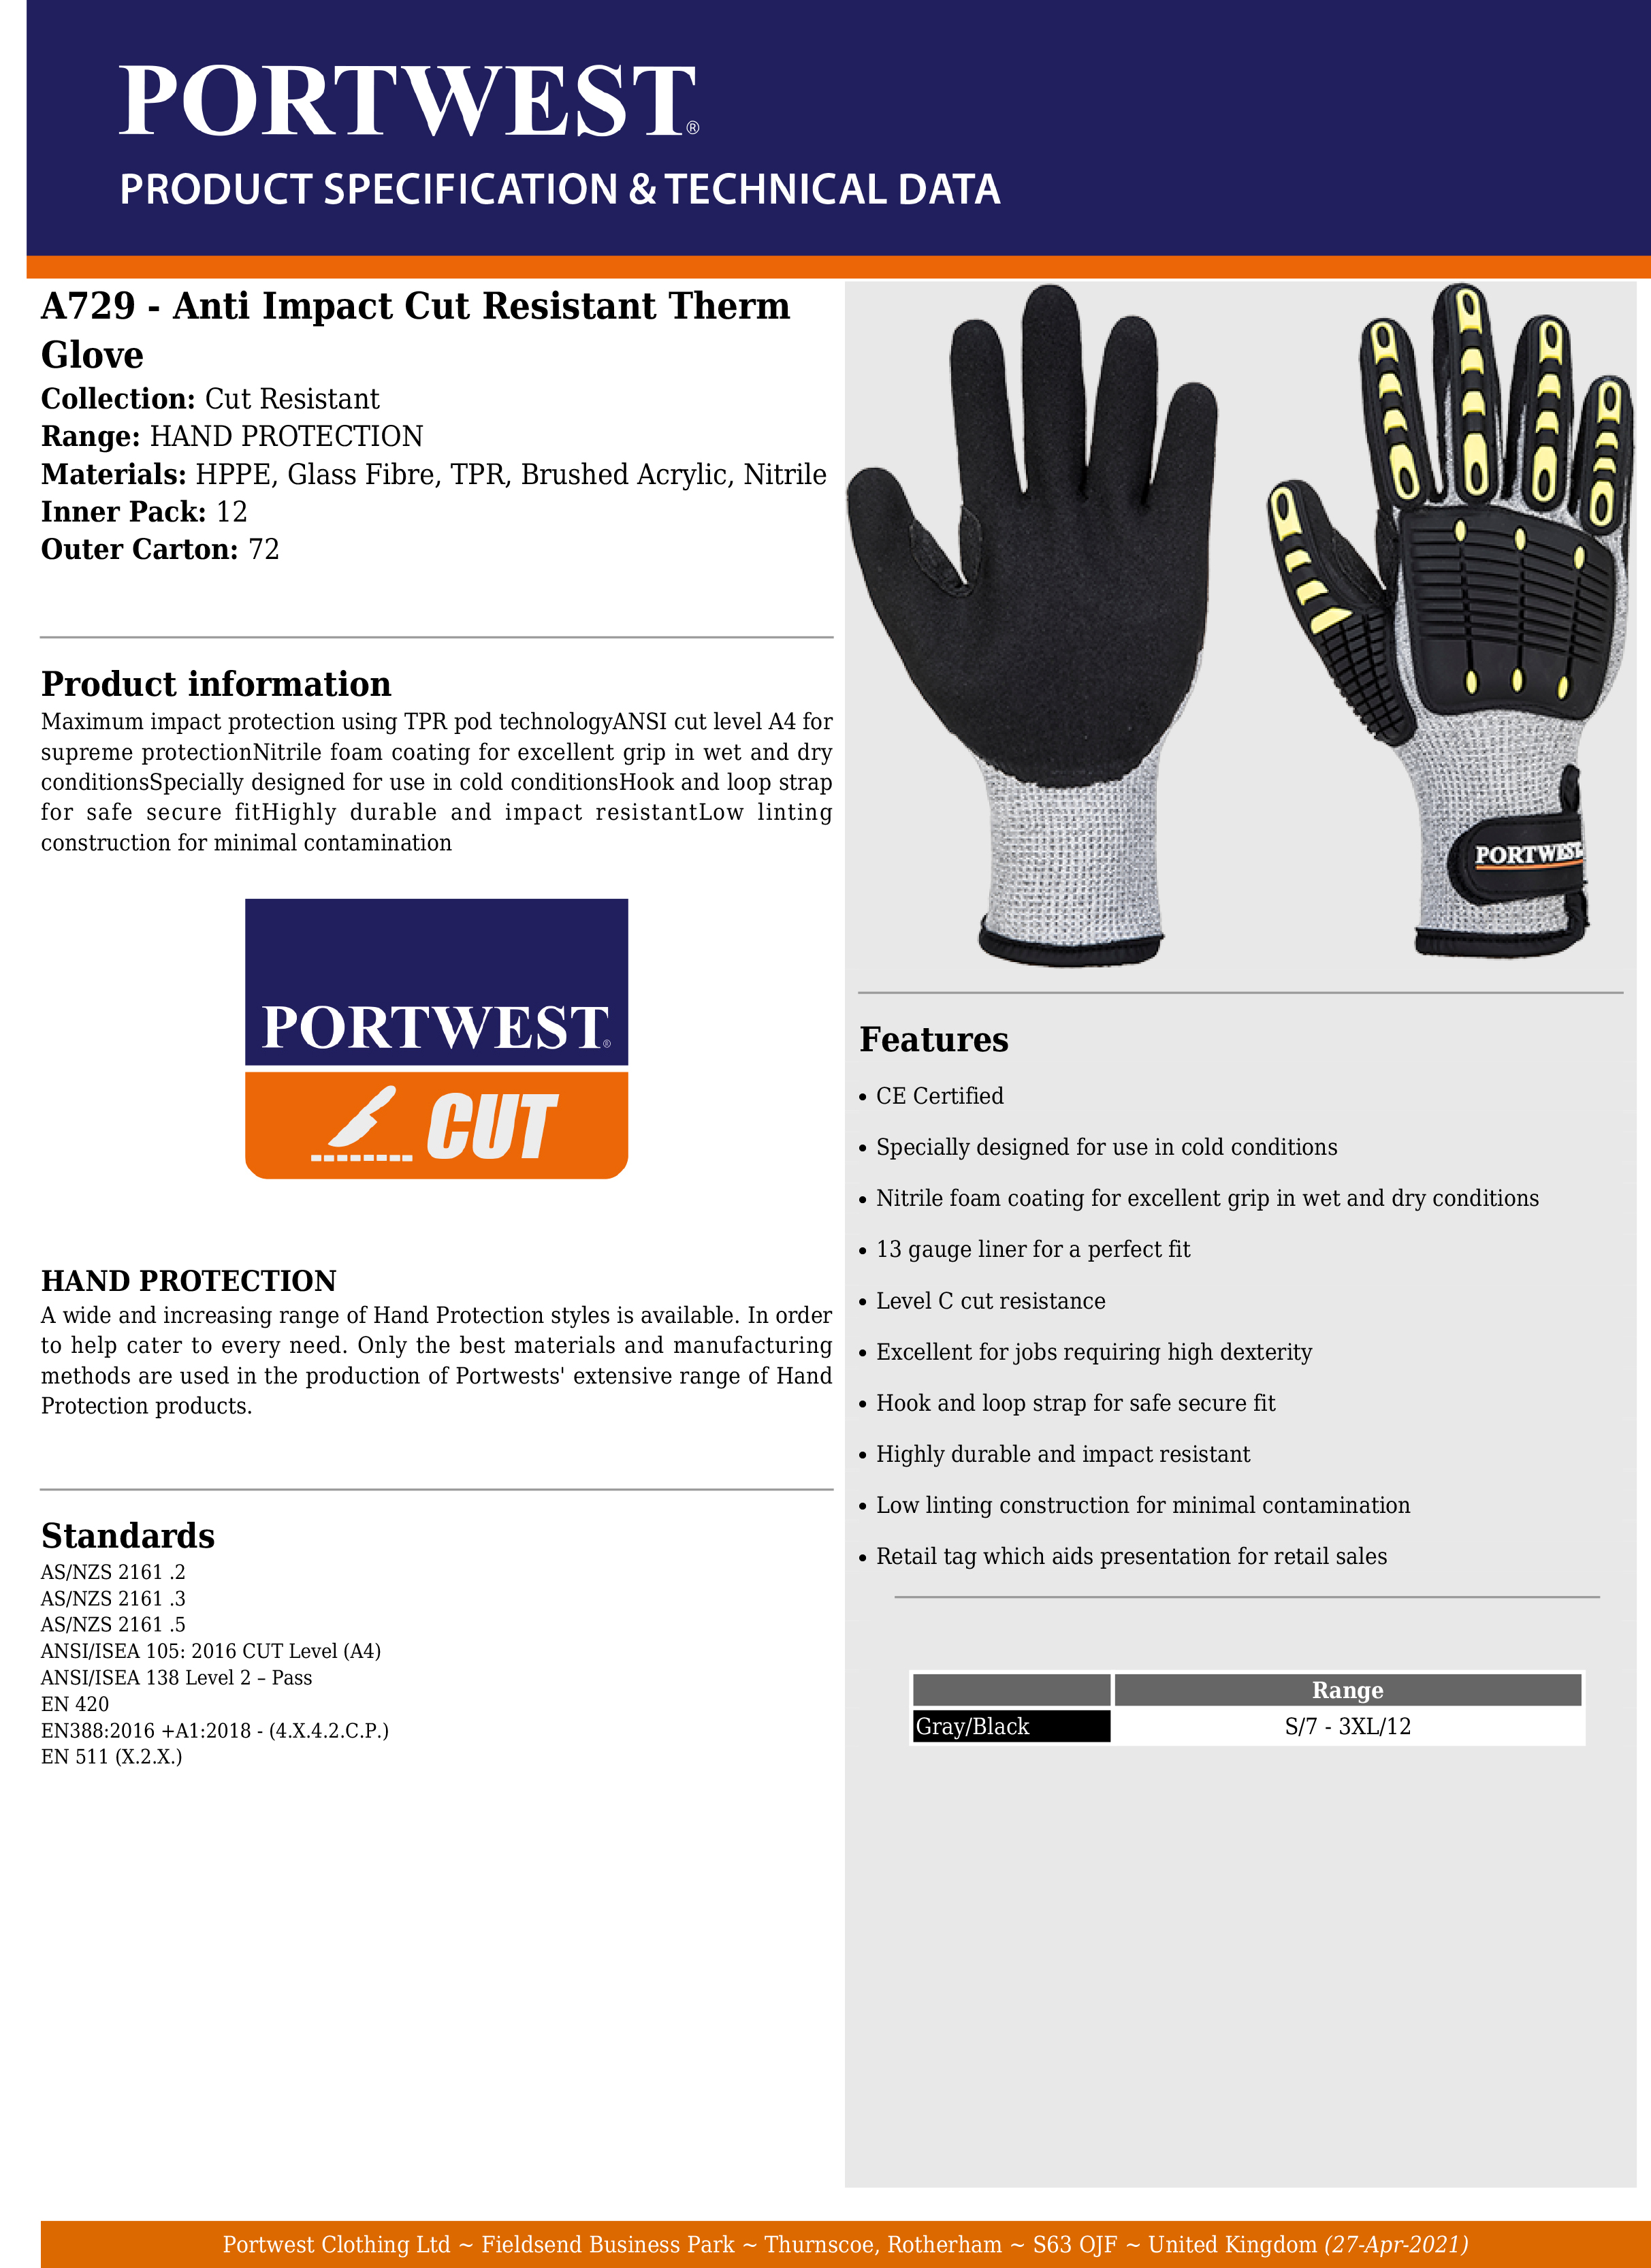 https://www.cabletiesandmore.com/uploads/A729-Portwest-Anti-Impact-Cut-Resistant-Thermal-Glove-Specification-Sheet-Thumbnail.jpg